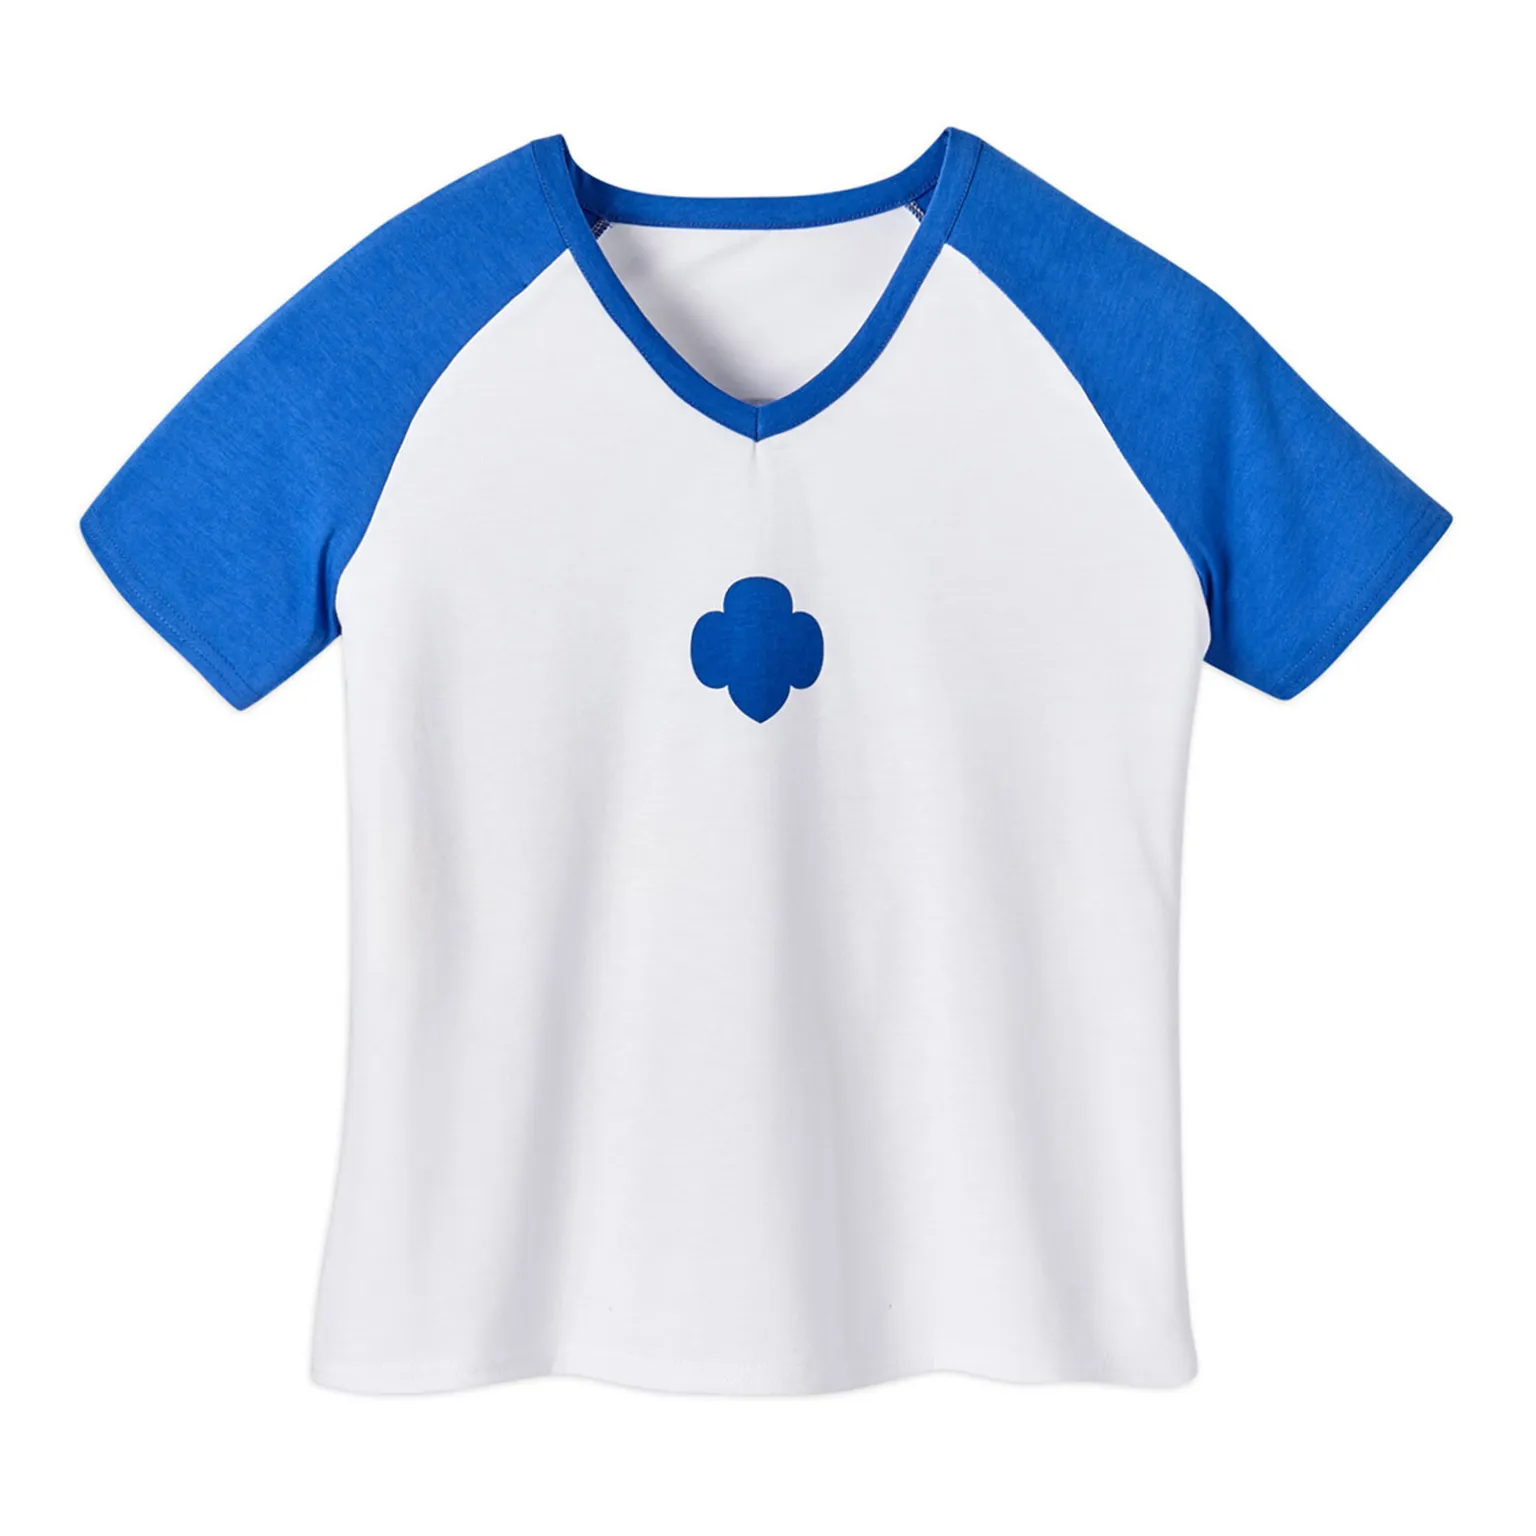 Girls V Neck T-Shirt manufacturing with recycled materials